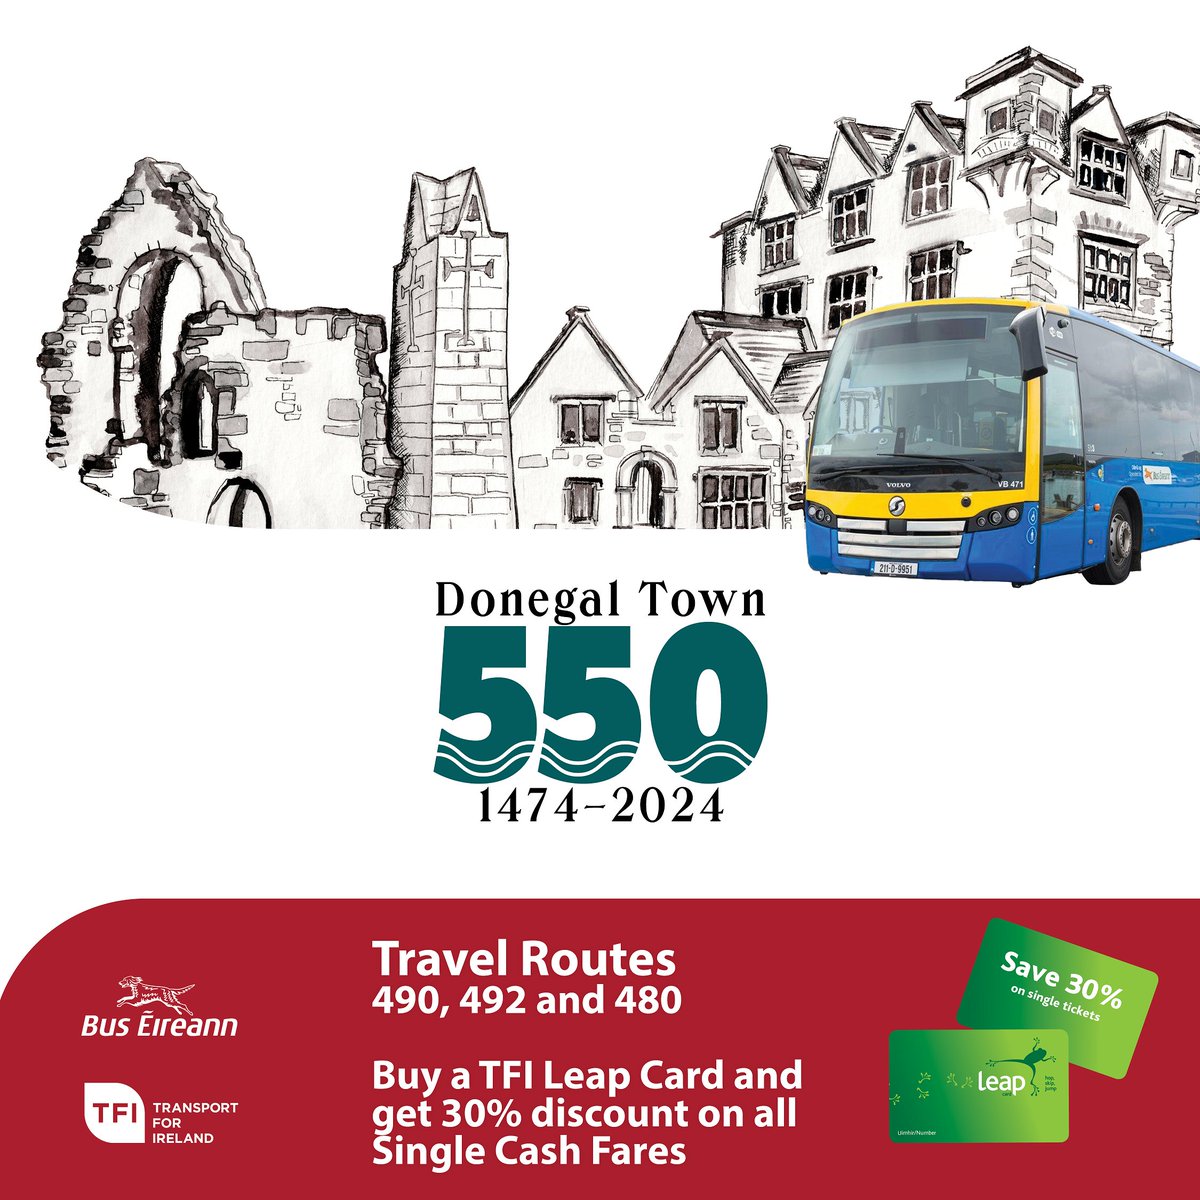 As Donegal Town's 550th birthday is being celebrated this year, travel to Donegal for the great events taking place throughout the year on Bus Éireann's Routes 480, 490 and 492. Don't forget, Bus Éireann's single fares cost 30% less when you use your Leap Card.